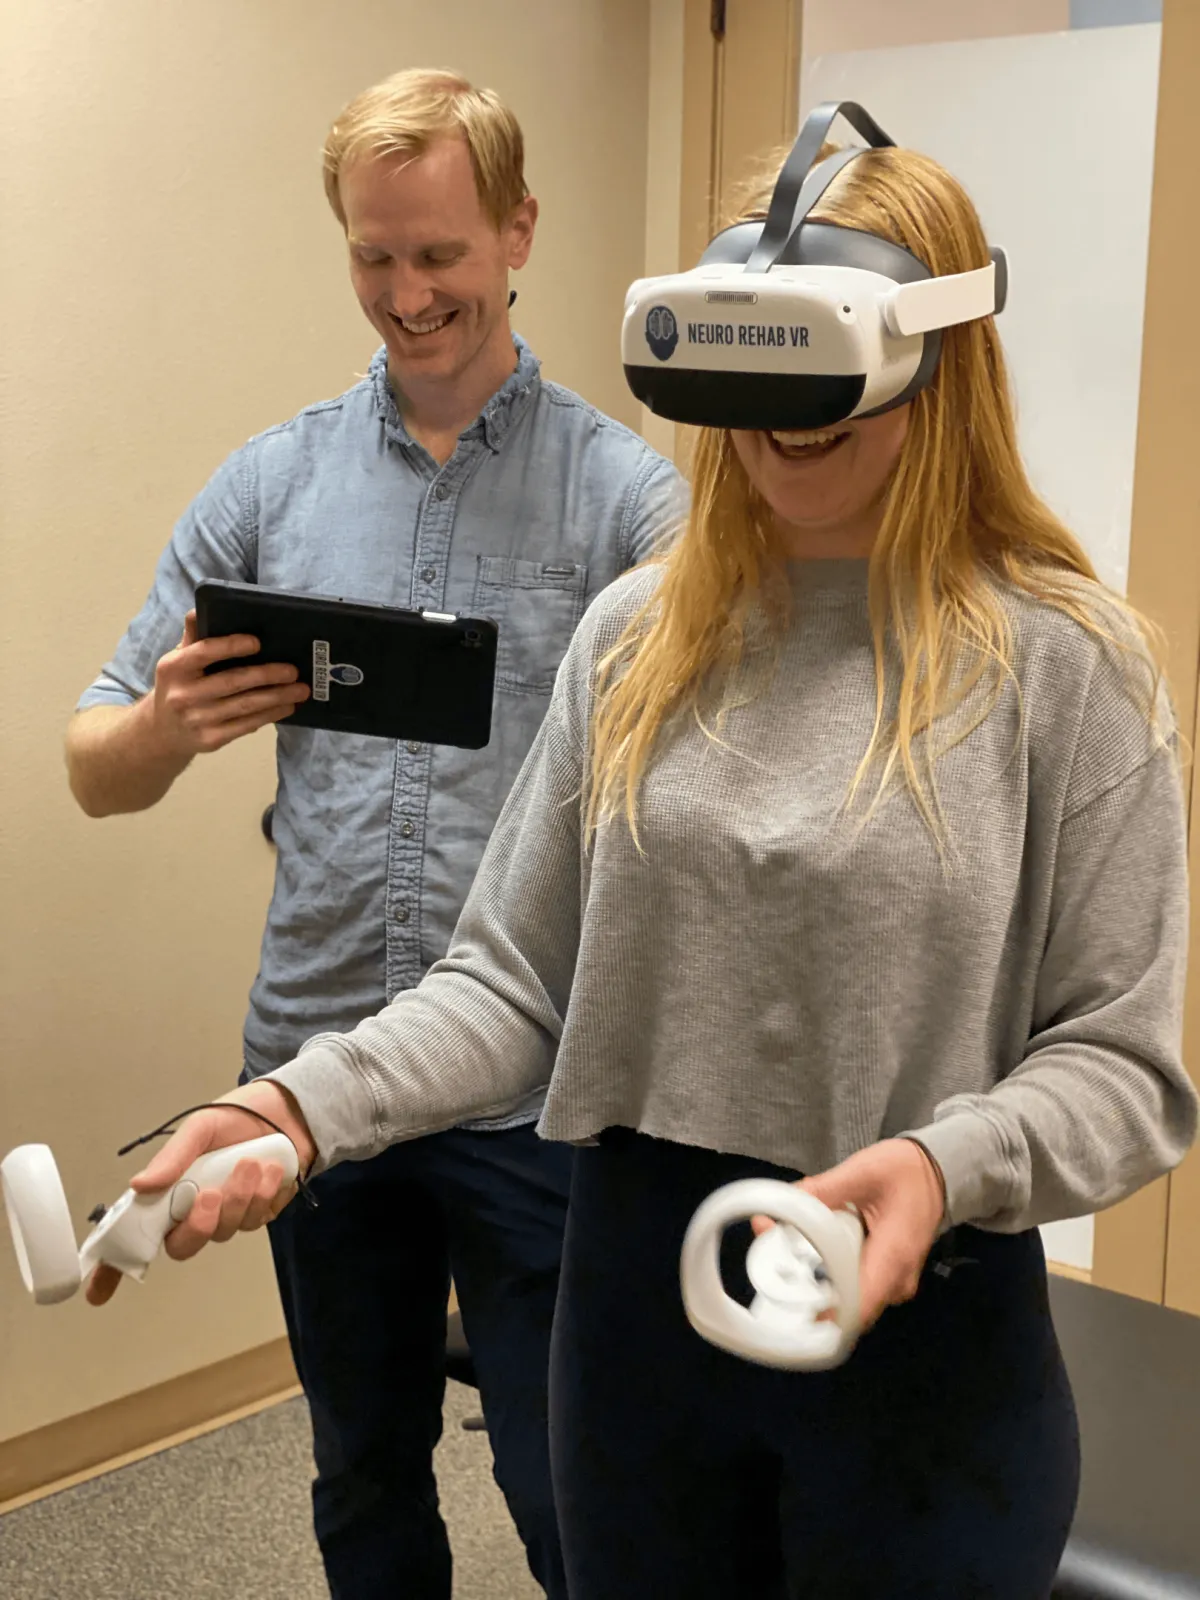 A smiling patient engages with a Virtual Reality physical therapy session under the supervision of a PhysioFIT therapist, showcasing the interactive and innovative treatment approach.